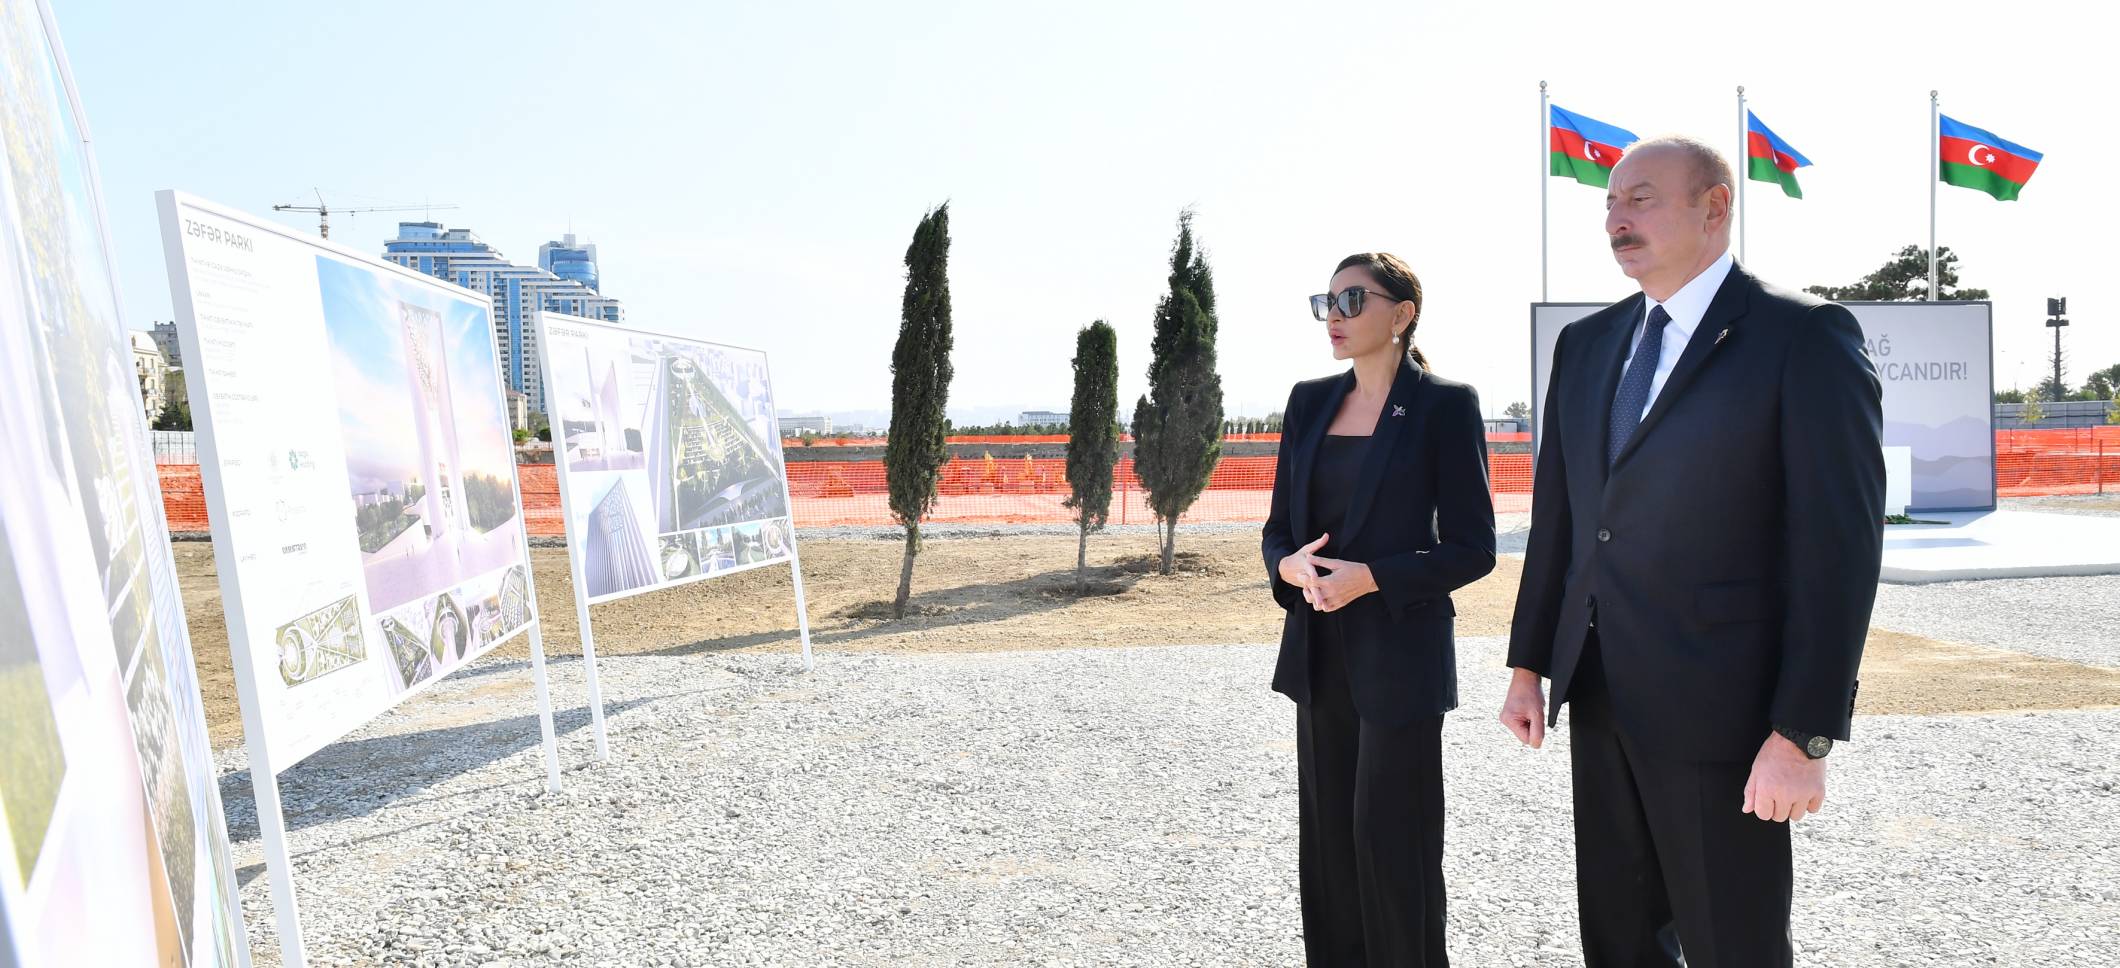 Ilham Aliyev and First Lady Mehriban Aliyeva visited Victory Park under construction